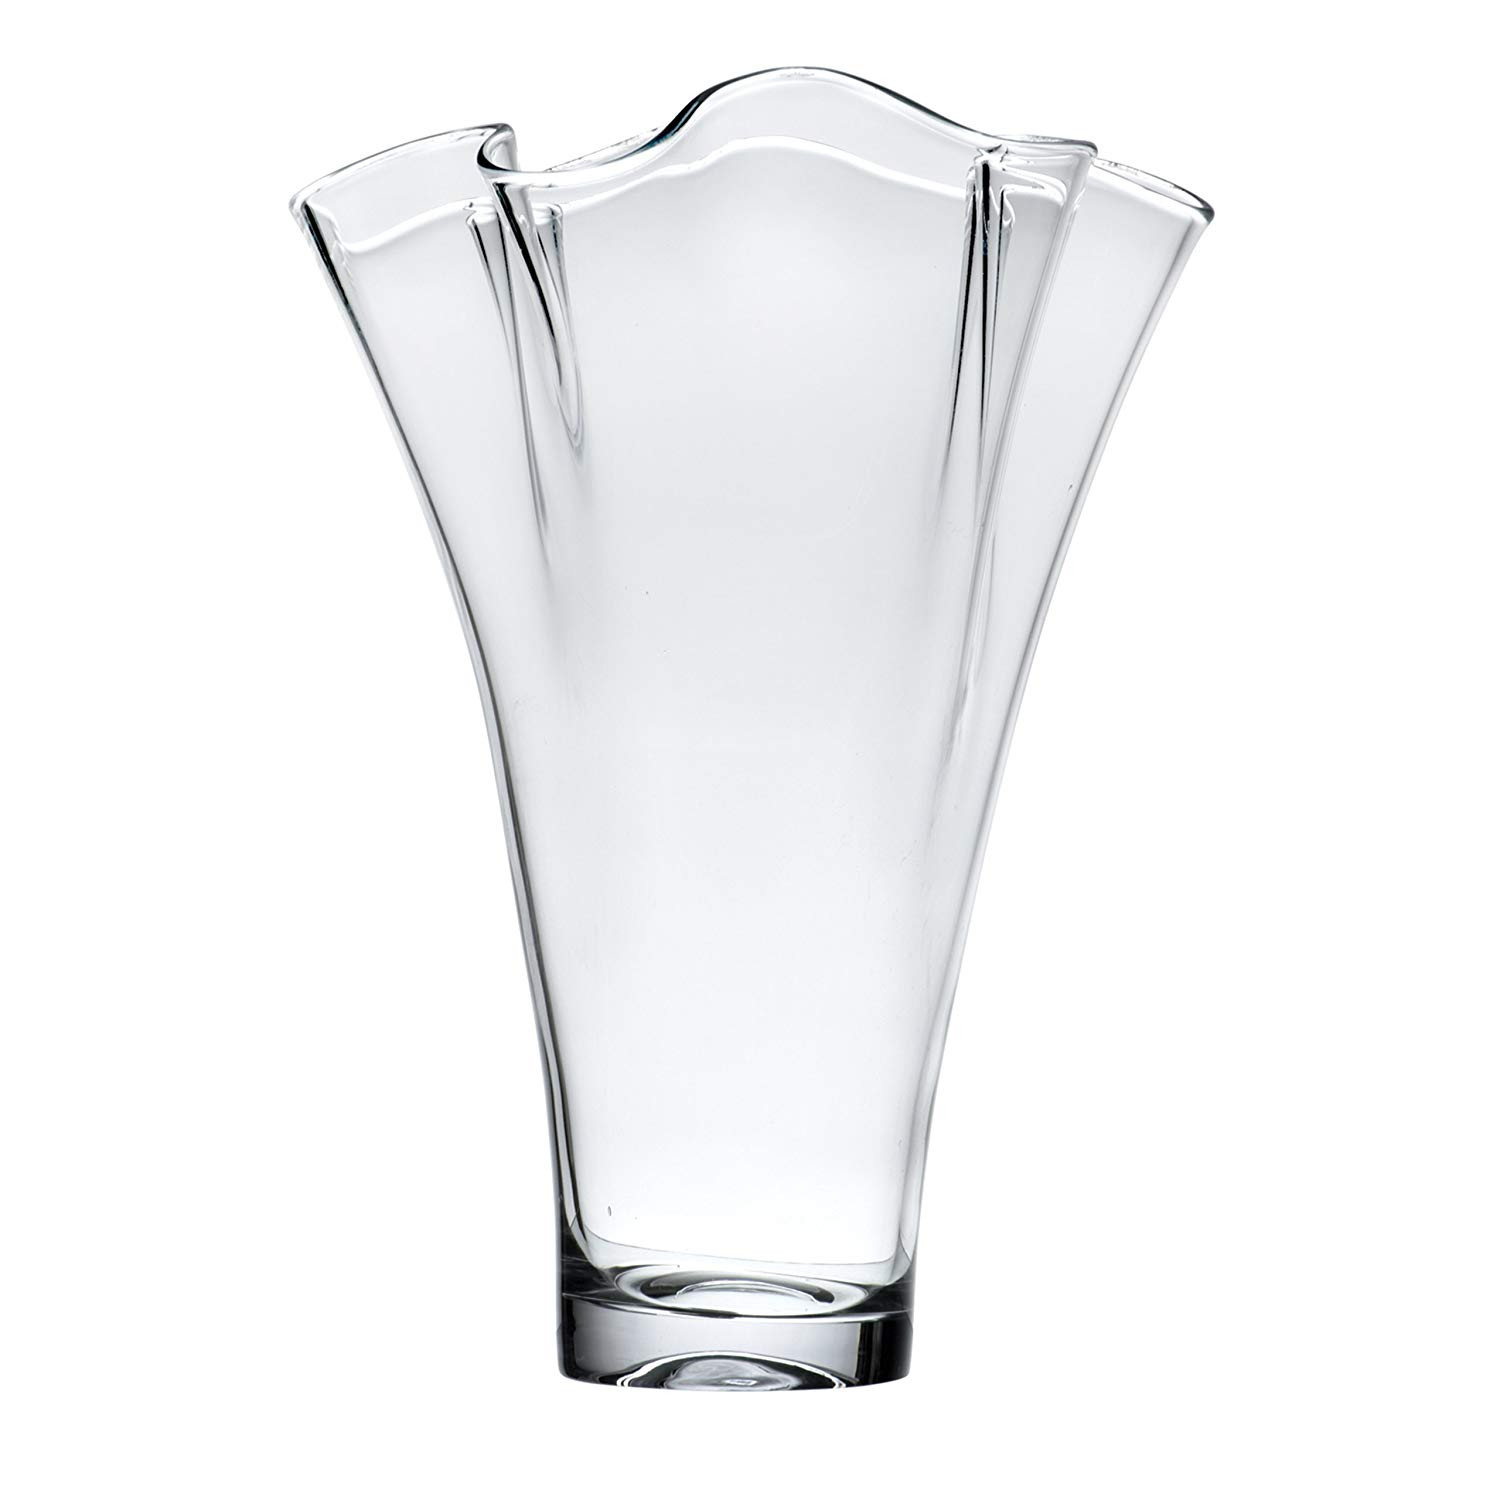 11 Nice Marquis by Waterford 9 Markham Vase 2024 free download marquis by waterford 9 markham vase of amazon com lenox organics ruffle wide crystal vase home kitchen within 71wp2r5 4el sl1500